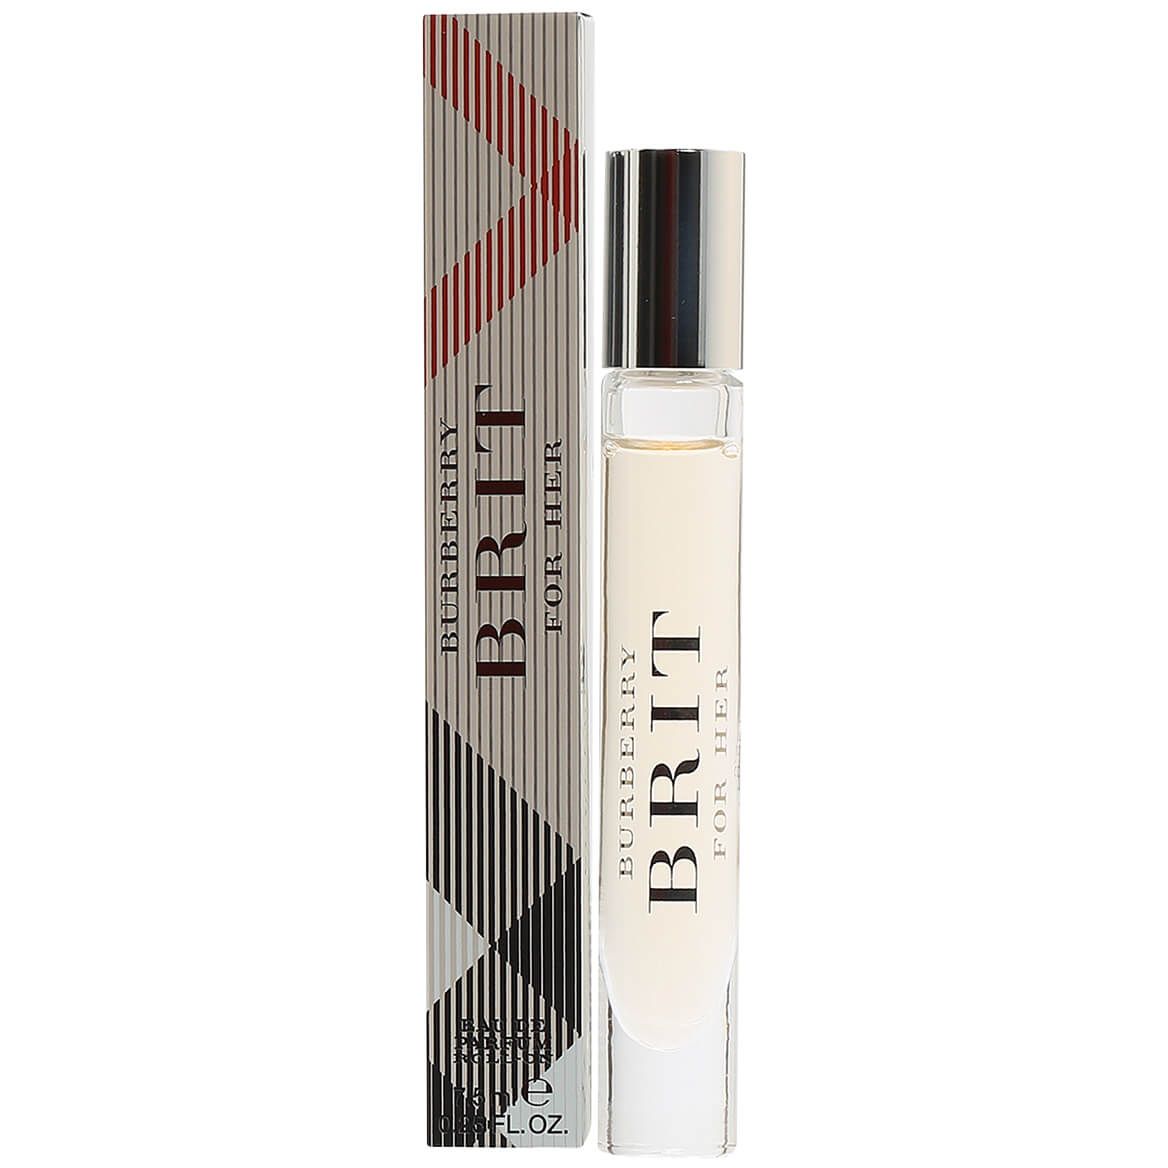 Burberry Brit by Burberry for Women Rollerball, .25 oz. + '-' + 373188